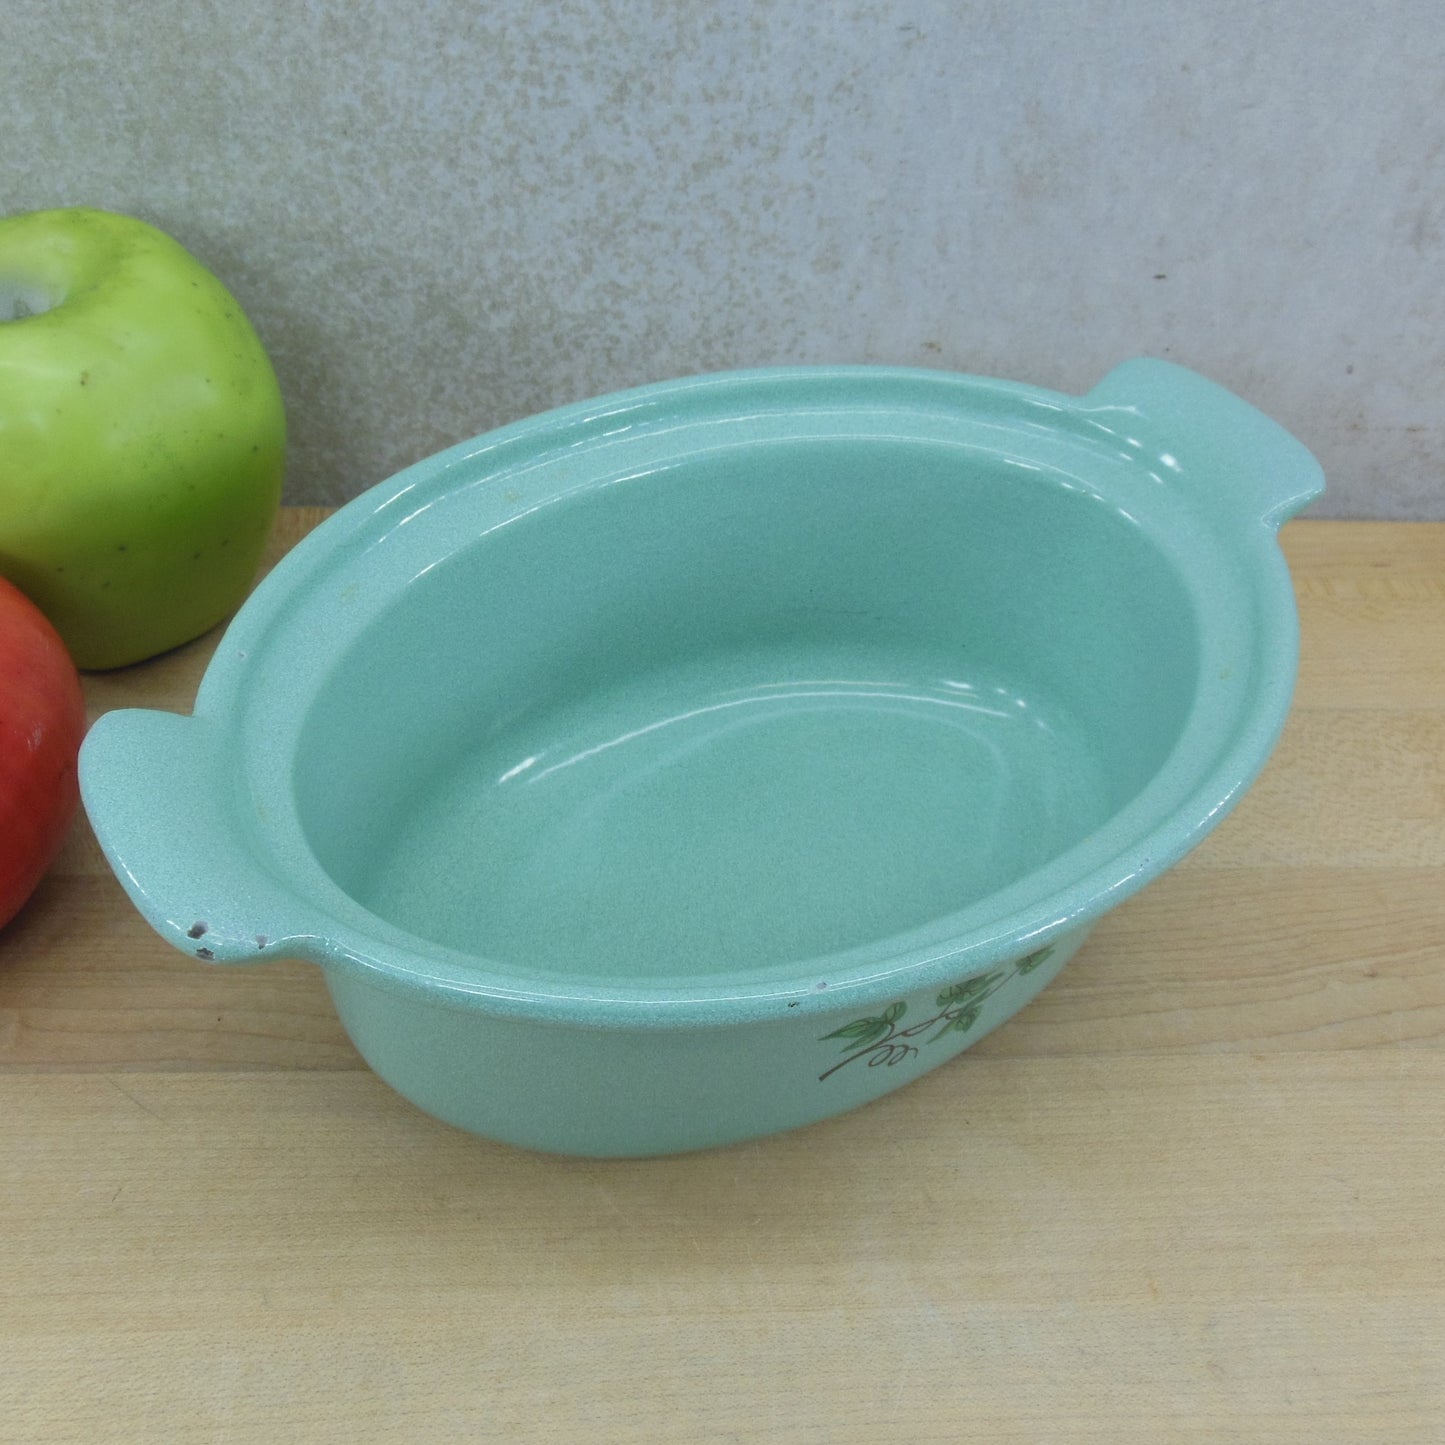 Prizer-Ware USA Ivy Turquoise Cast Iron Small Oval Casserole - No Lid vintage